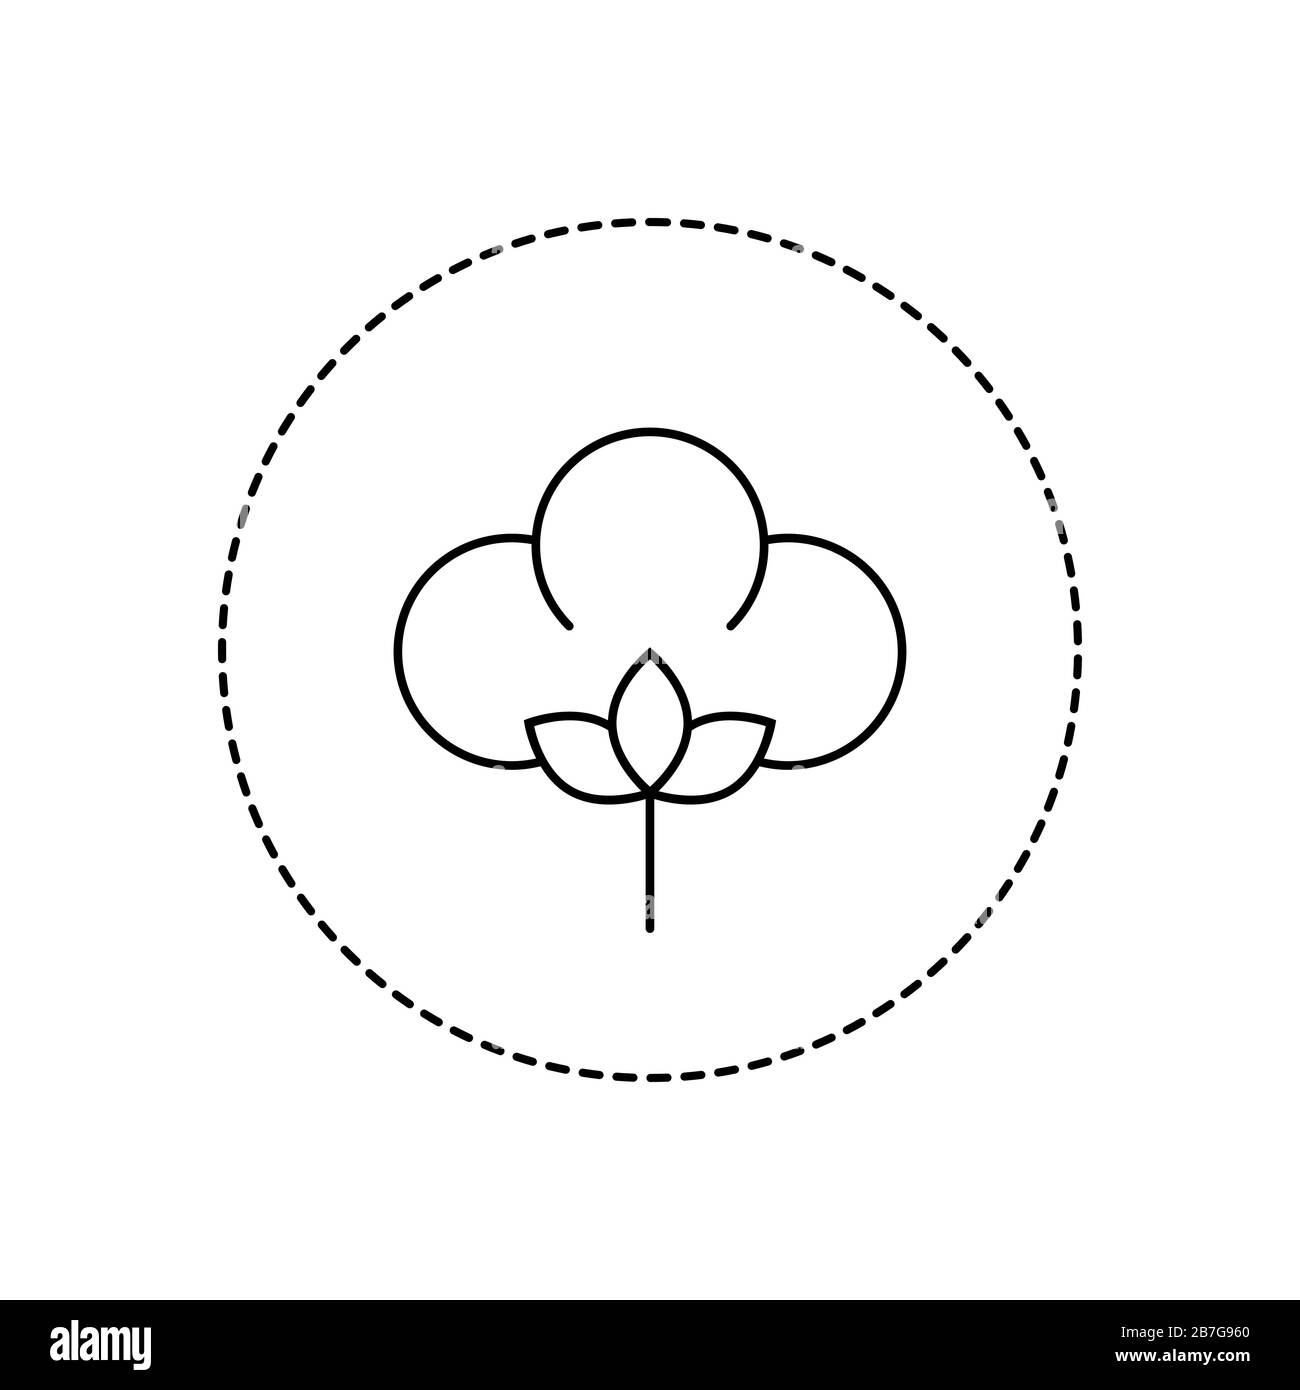 https://c8.alamy.com/comp/2B7G960/cotton-icon-in-a-circle-symbol-for-natural-fabrics-and-ethical-fashion-industry-organic-cotton-linear-sign-100-cotton-label-round-tag-or-logo-2B7G960.jpg